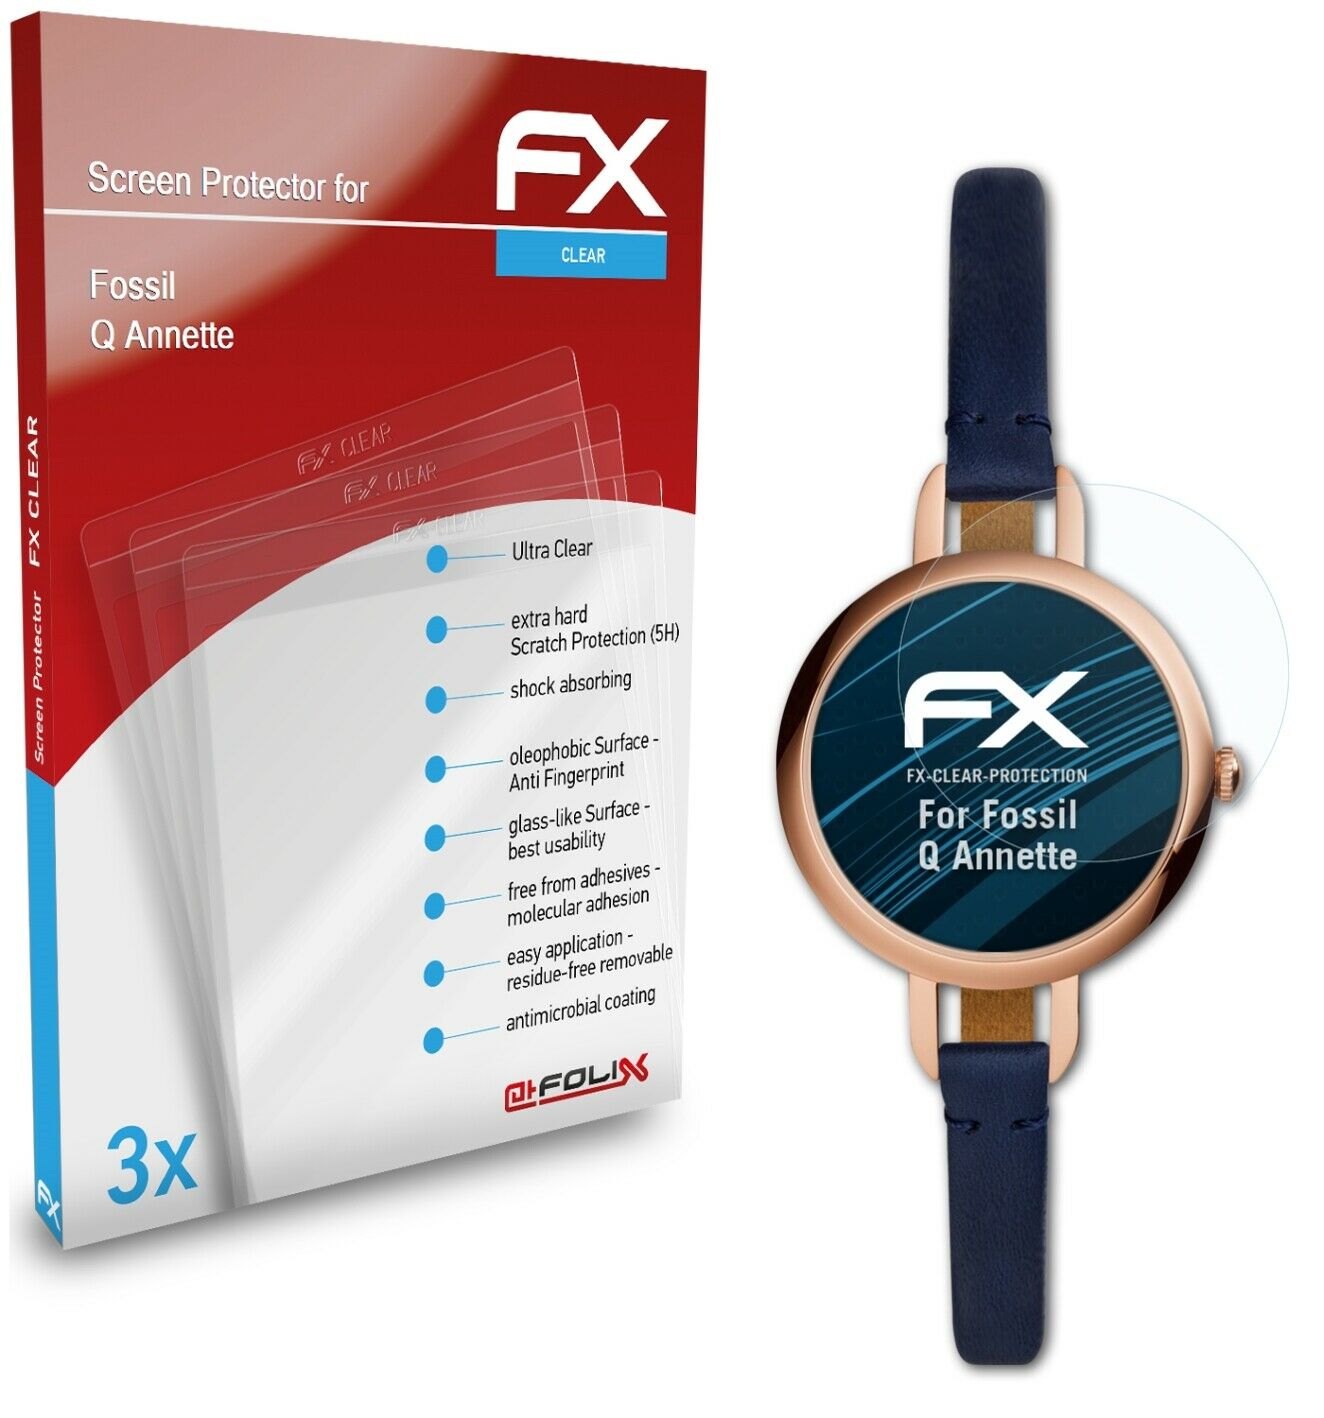 atFoliX 3x Screen Protection Film for Fossil Q Annette Screen Protector clear